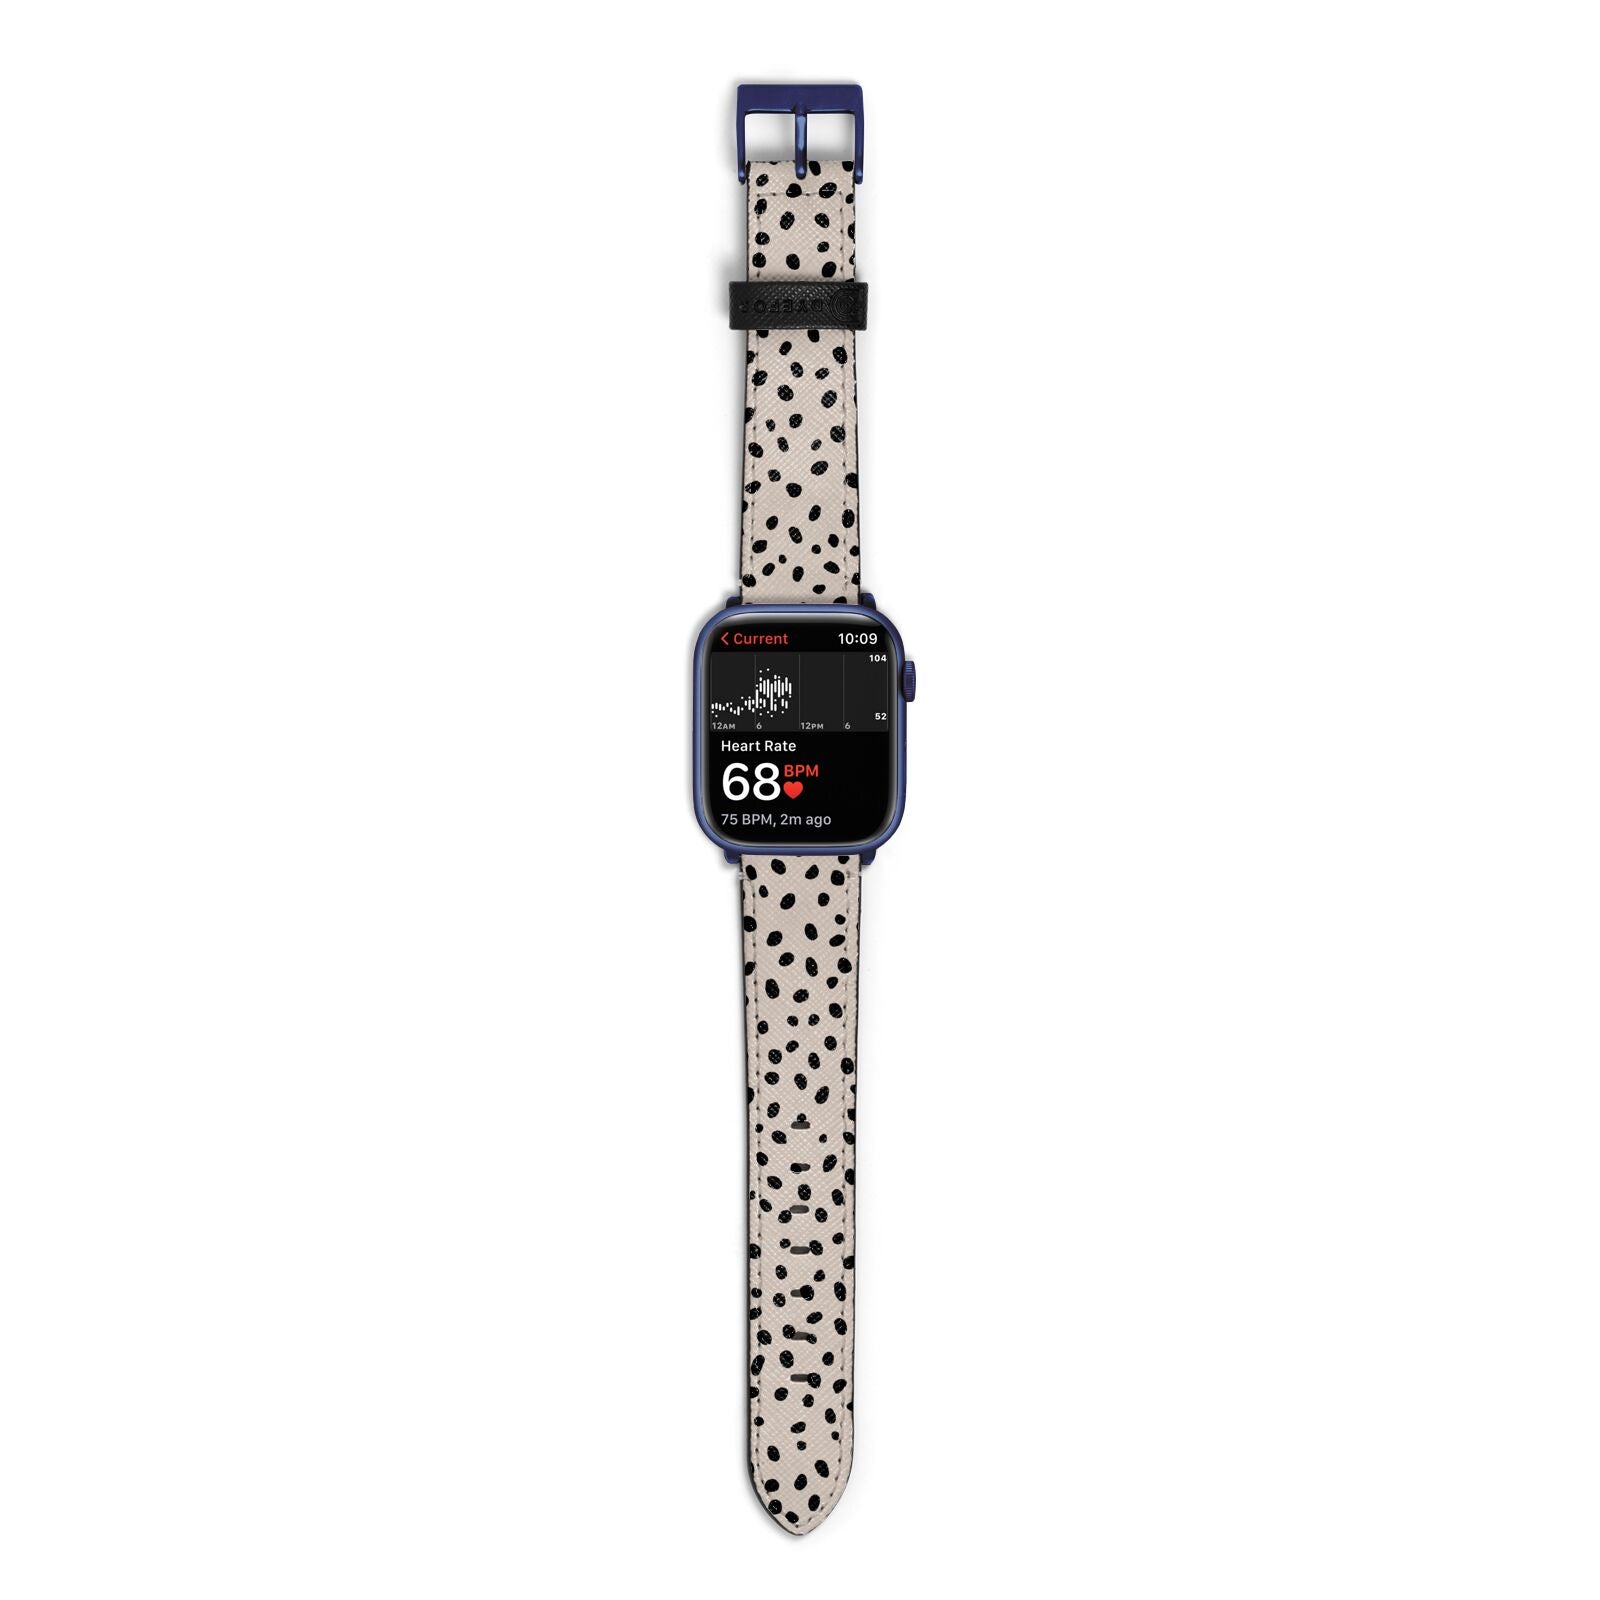 Almond Polka Dot Apple Watch Strap Size 38mm with Blue Hardware